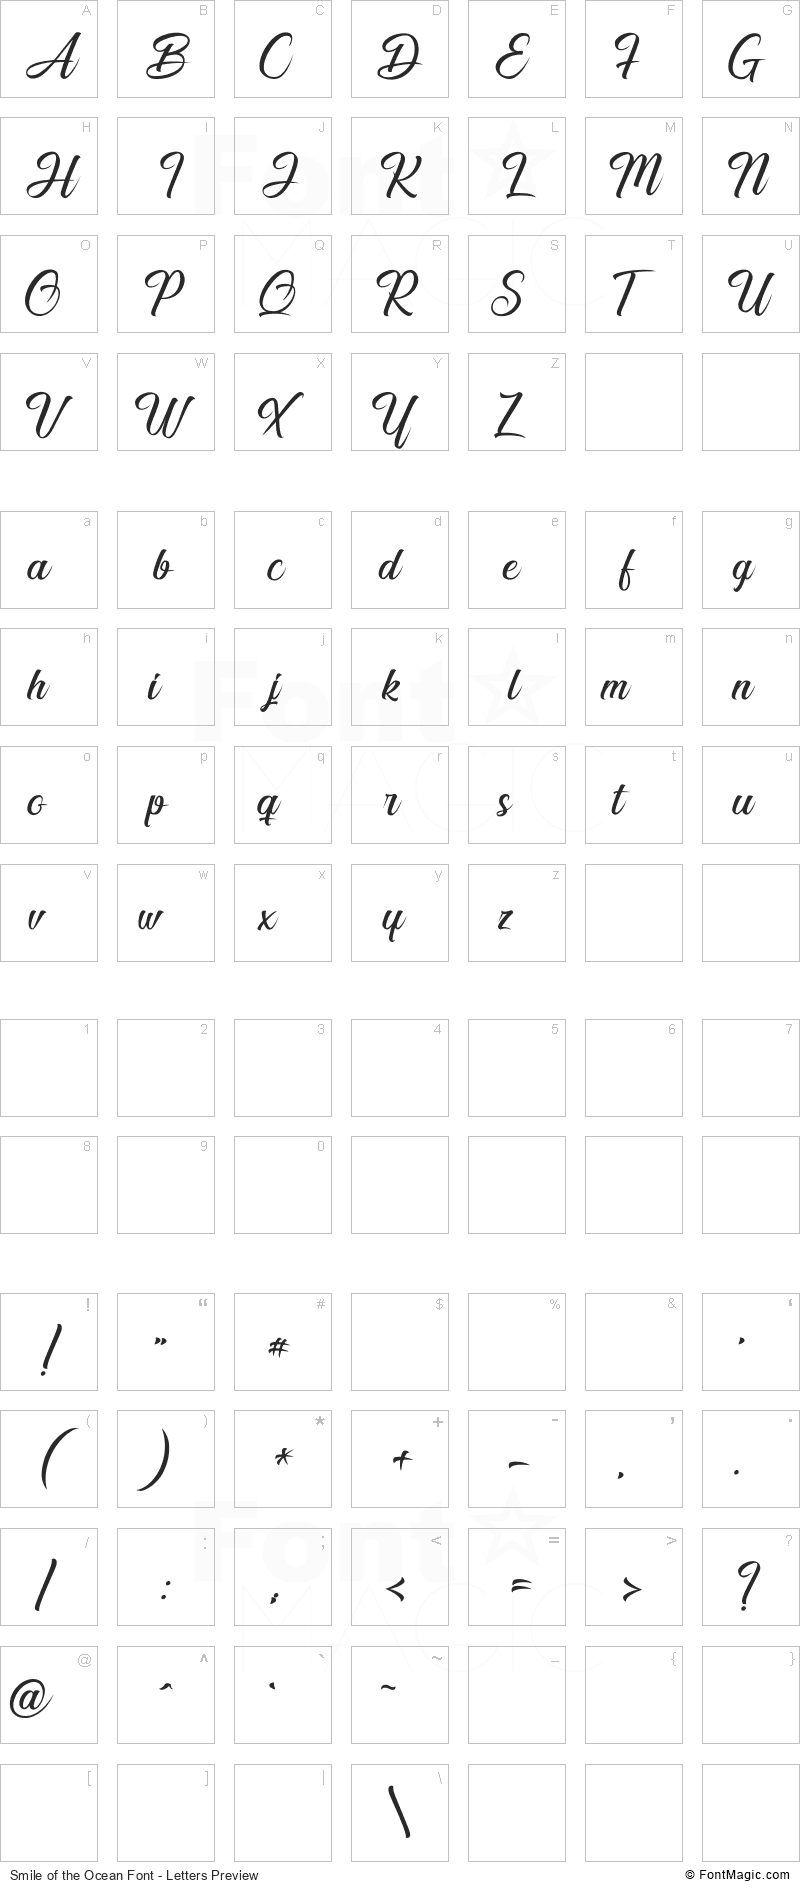 Smile of the Ocean Font - All Latters Preview Chart